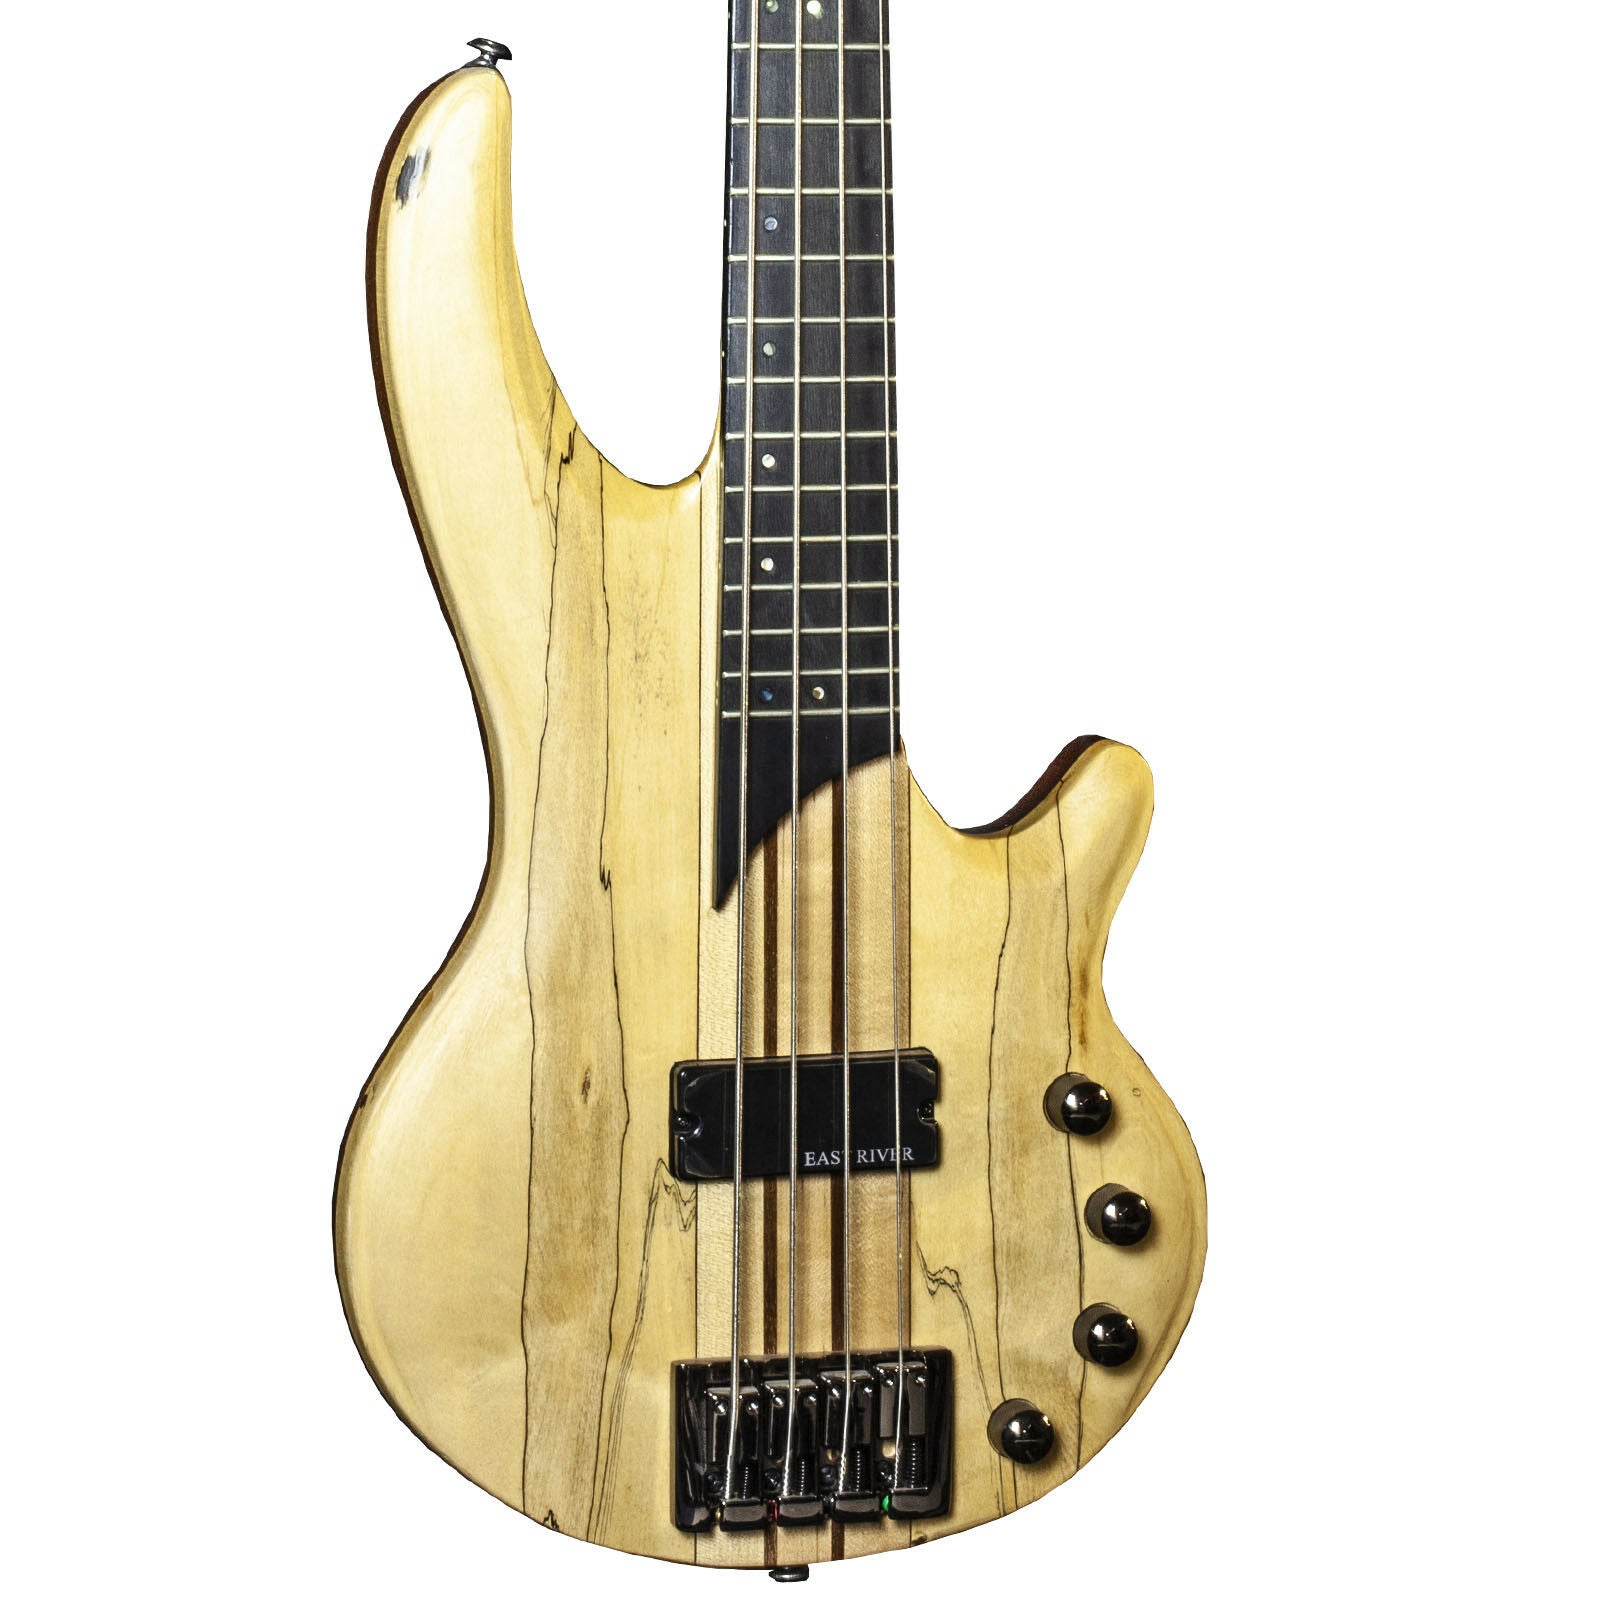 Bass Electric Guitar Tanglewood Canyon III 3 With Spalted Maple Top